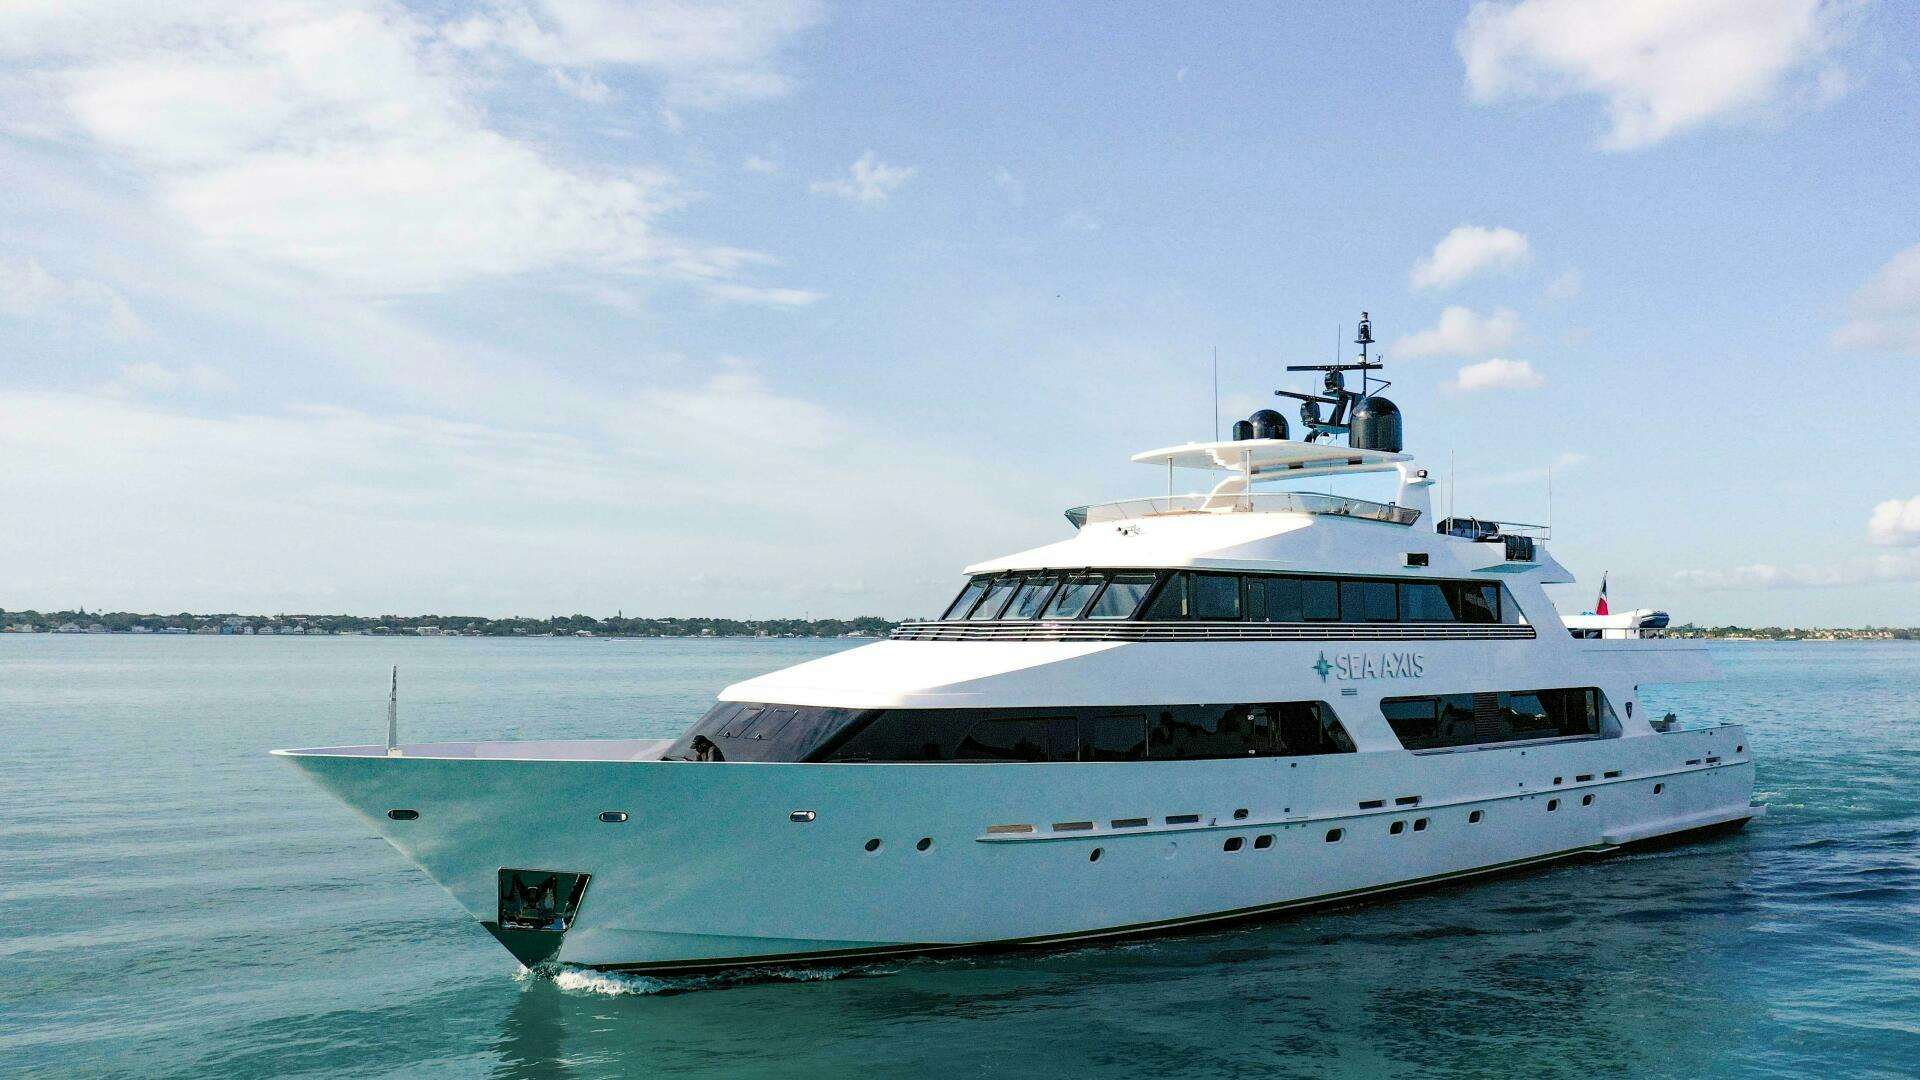 Sea axis
Yacht for Sale